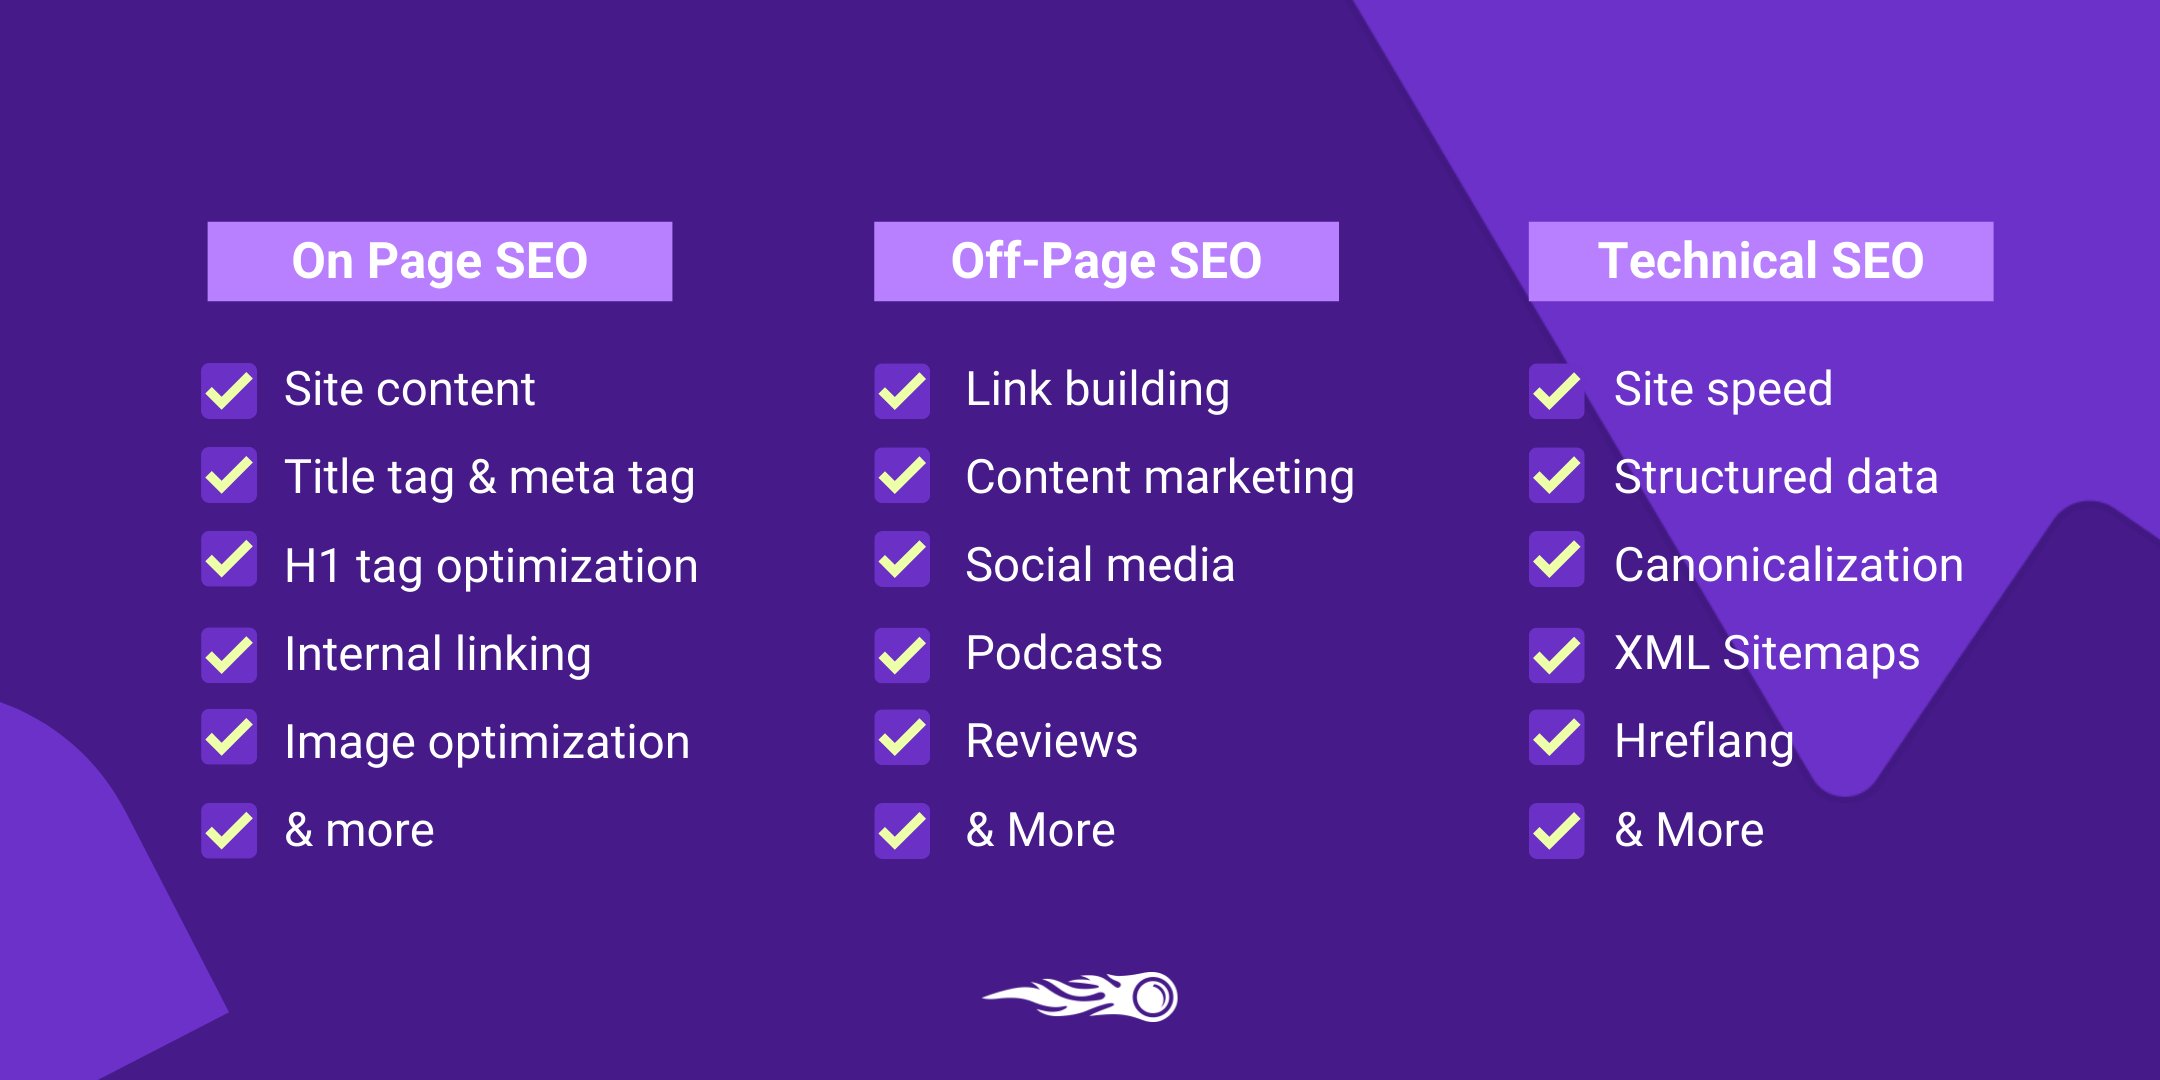 The Complete Guide to On-Page and Off-Page SEO